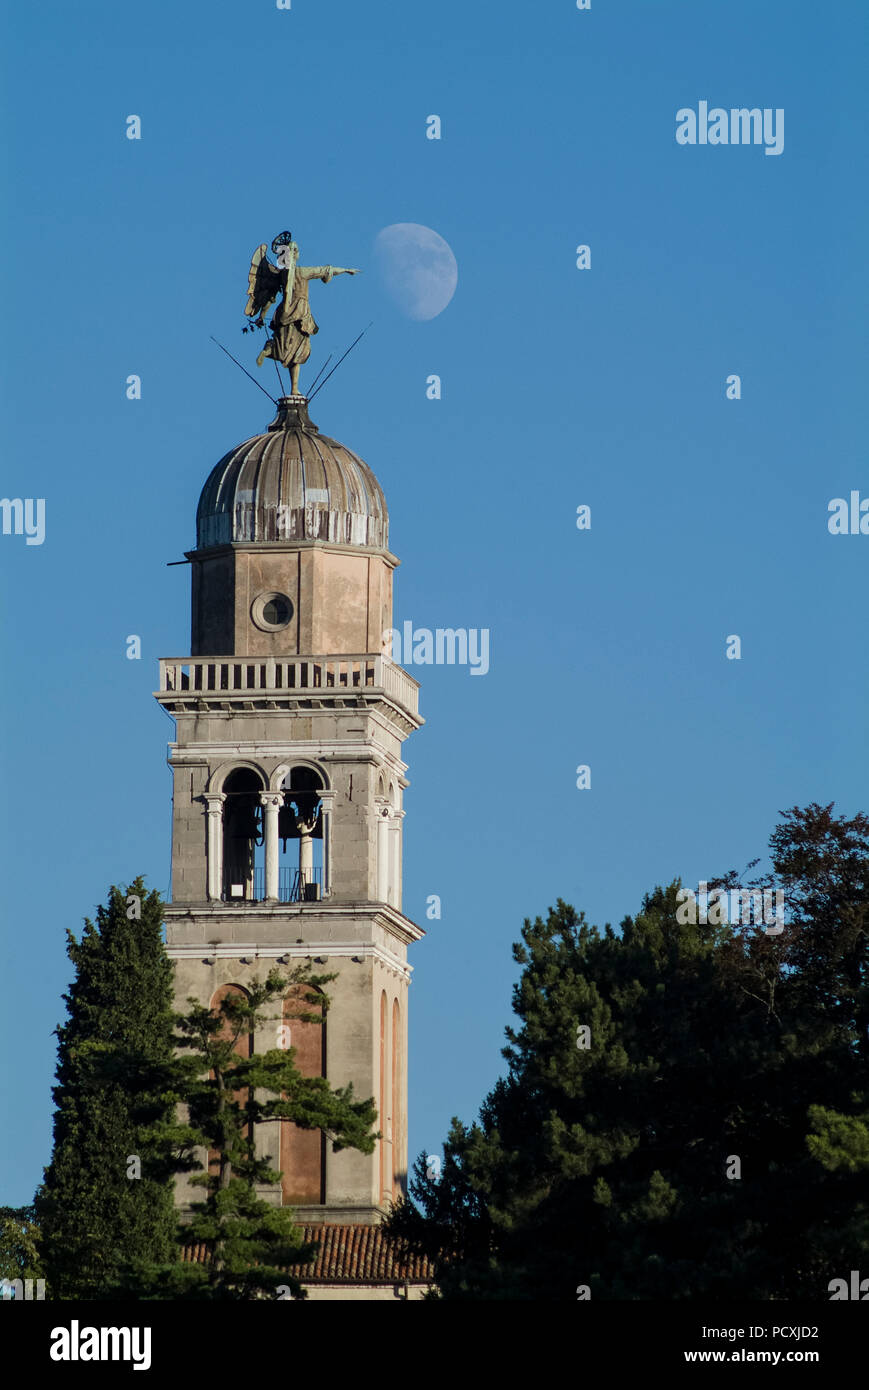 UDINE, ITALY, JULY 25, 2007: The angel on the steeple of the Church of Santa Maria di Castello in Udine pointing to the moon. Stock Photo